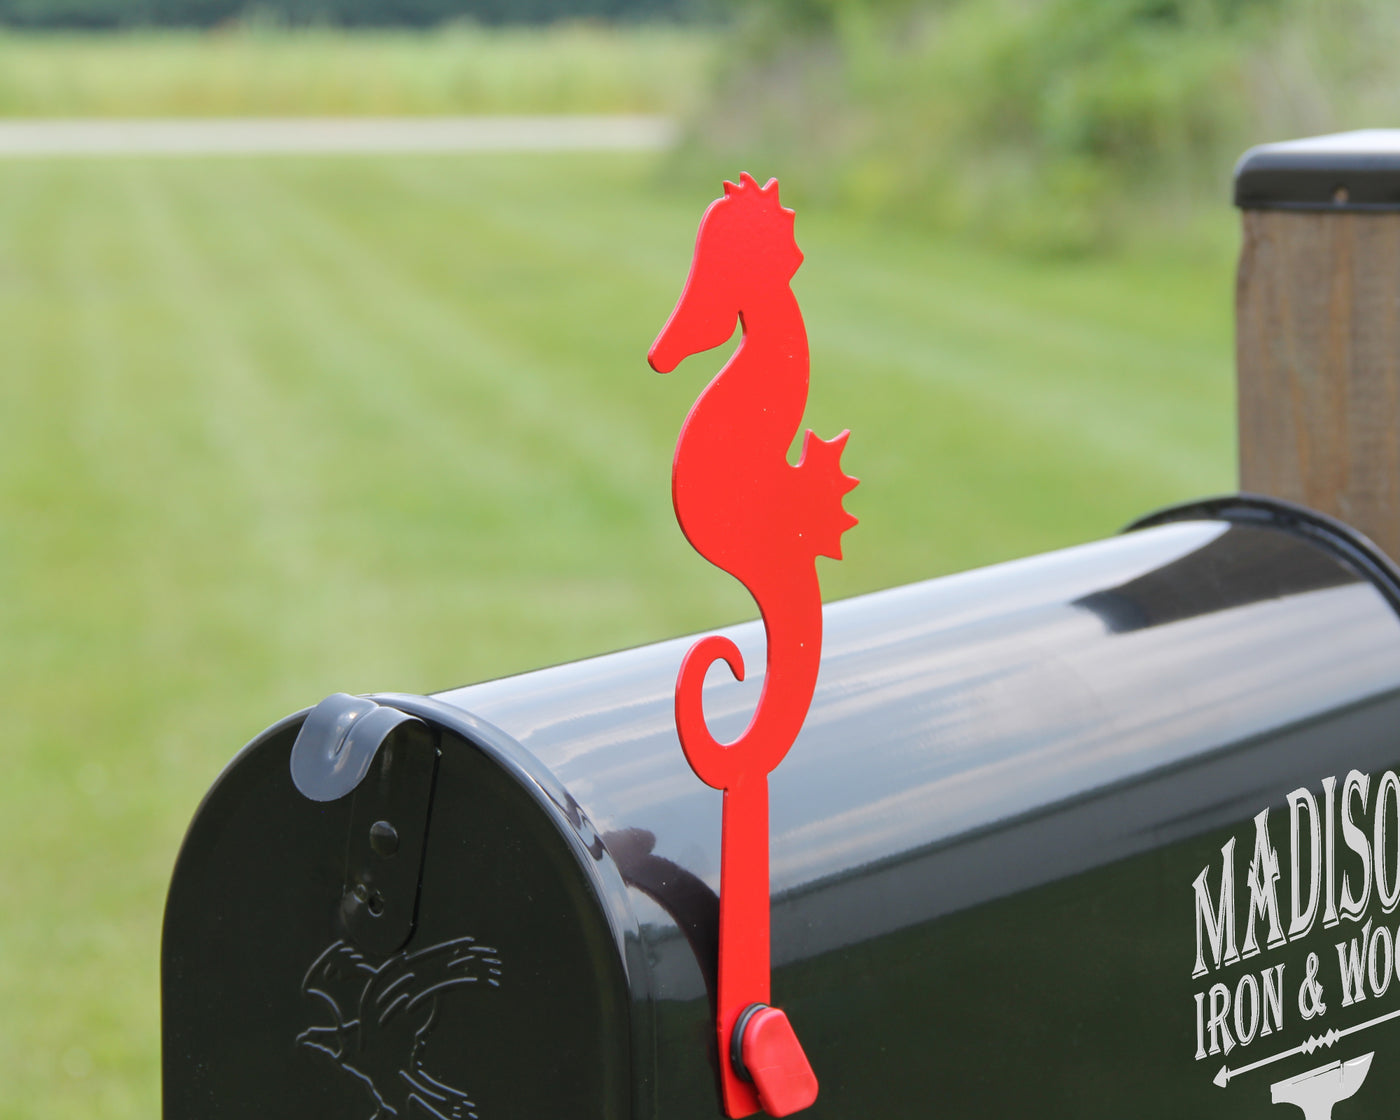 Sea Horse Mailbox Flag - Madison Iron and Wood - Mailbox Post Decor - metal outdoor decor - Steel deocrations - american made products - veteran owned business products - fencing decorations - fencing supplies - custom wall decorations - personalized wall signs - steel - decorative post caps - steel post caps - metal post caps - brackets - structural brackets - home improvement - easter - easter decorations - easter gift - easter yard decor